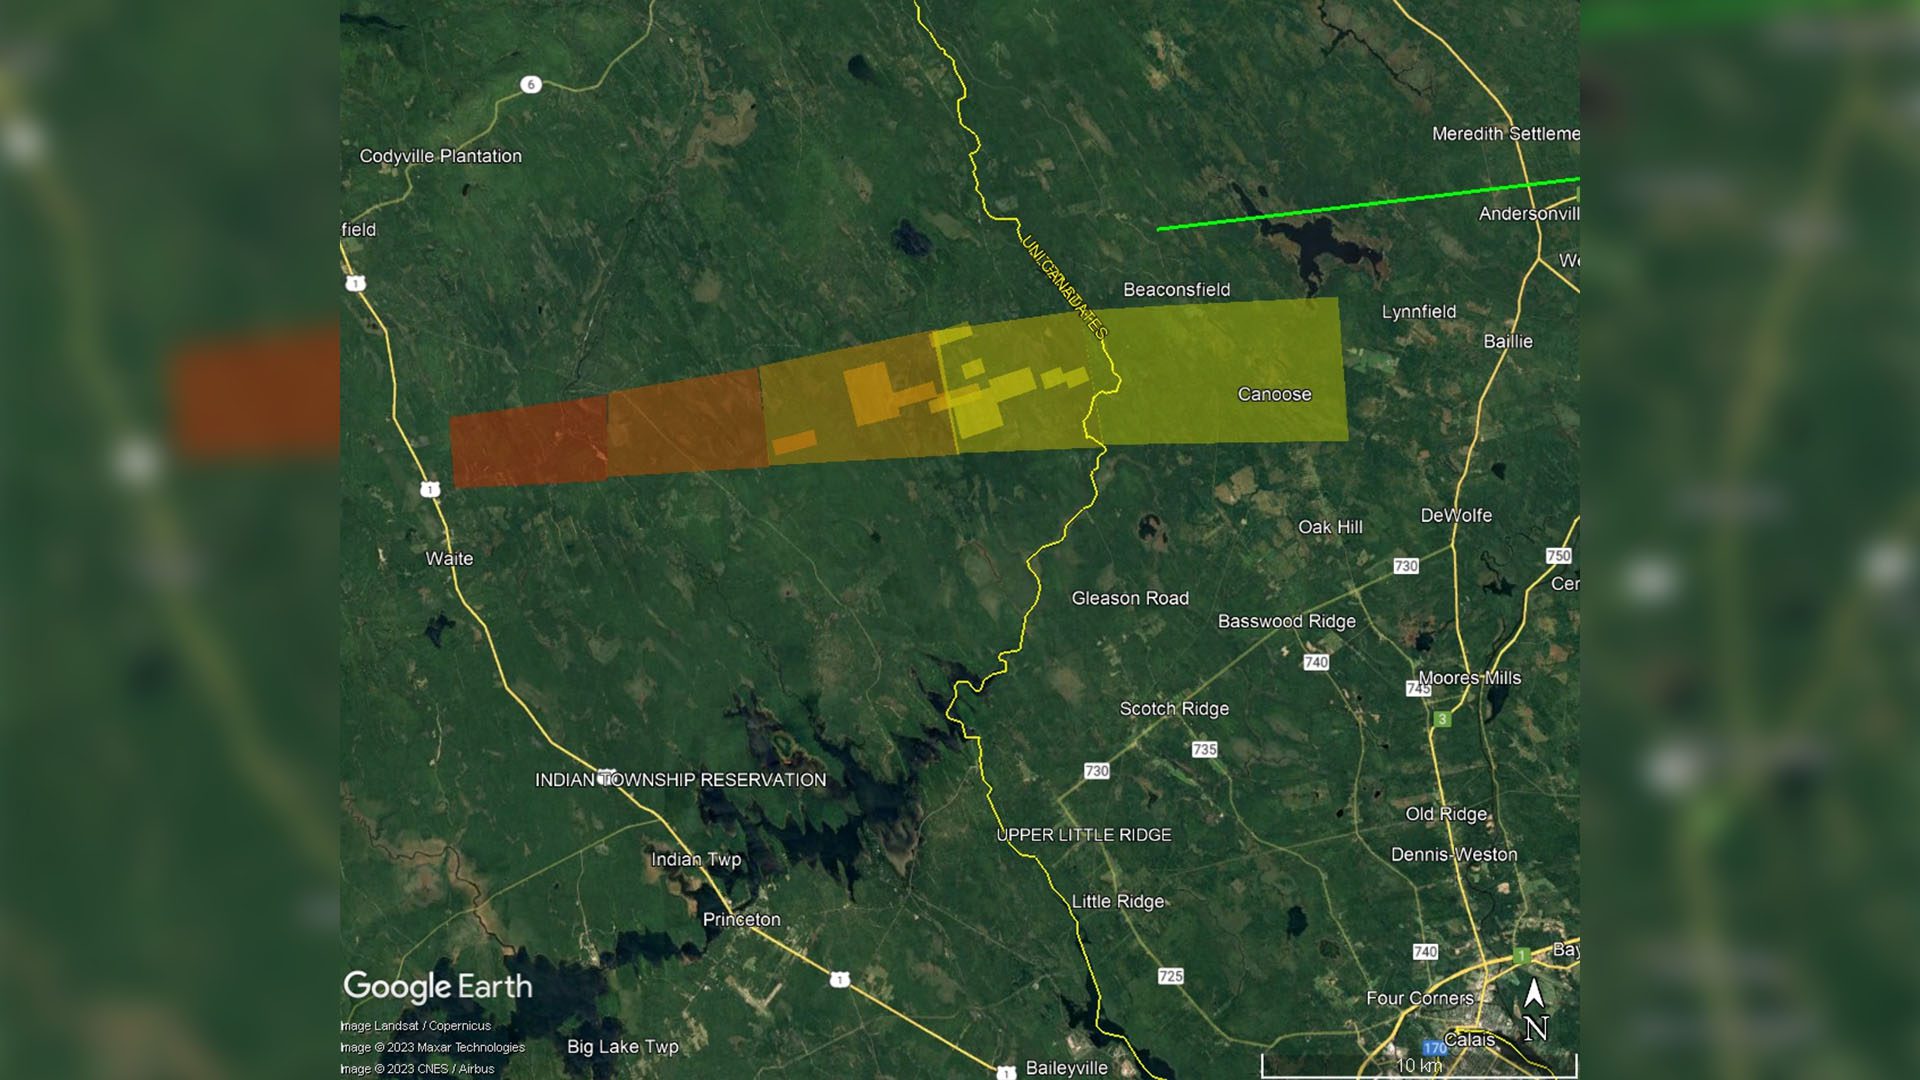 Strewn field estimate calculated from radar signatures, scaled from 10kg (red) to 1g (yellow)